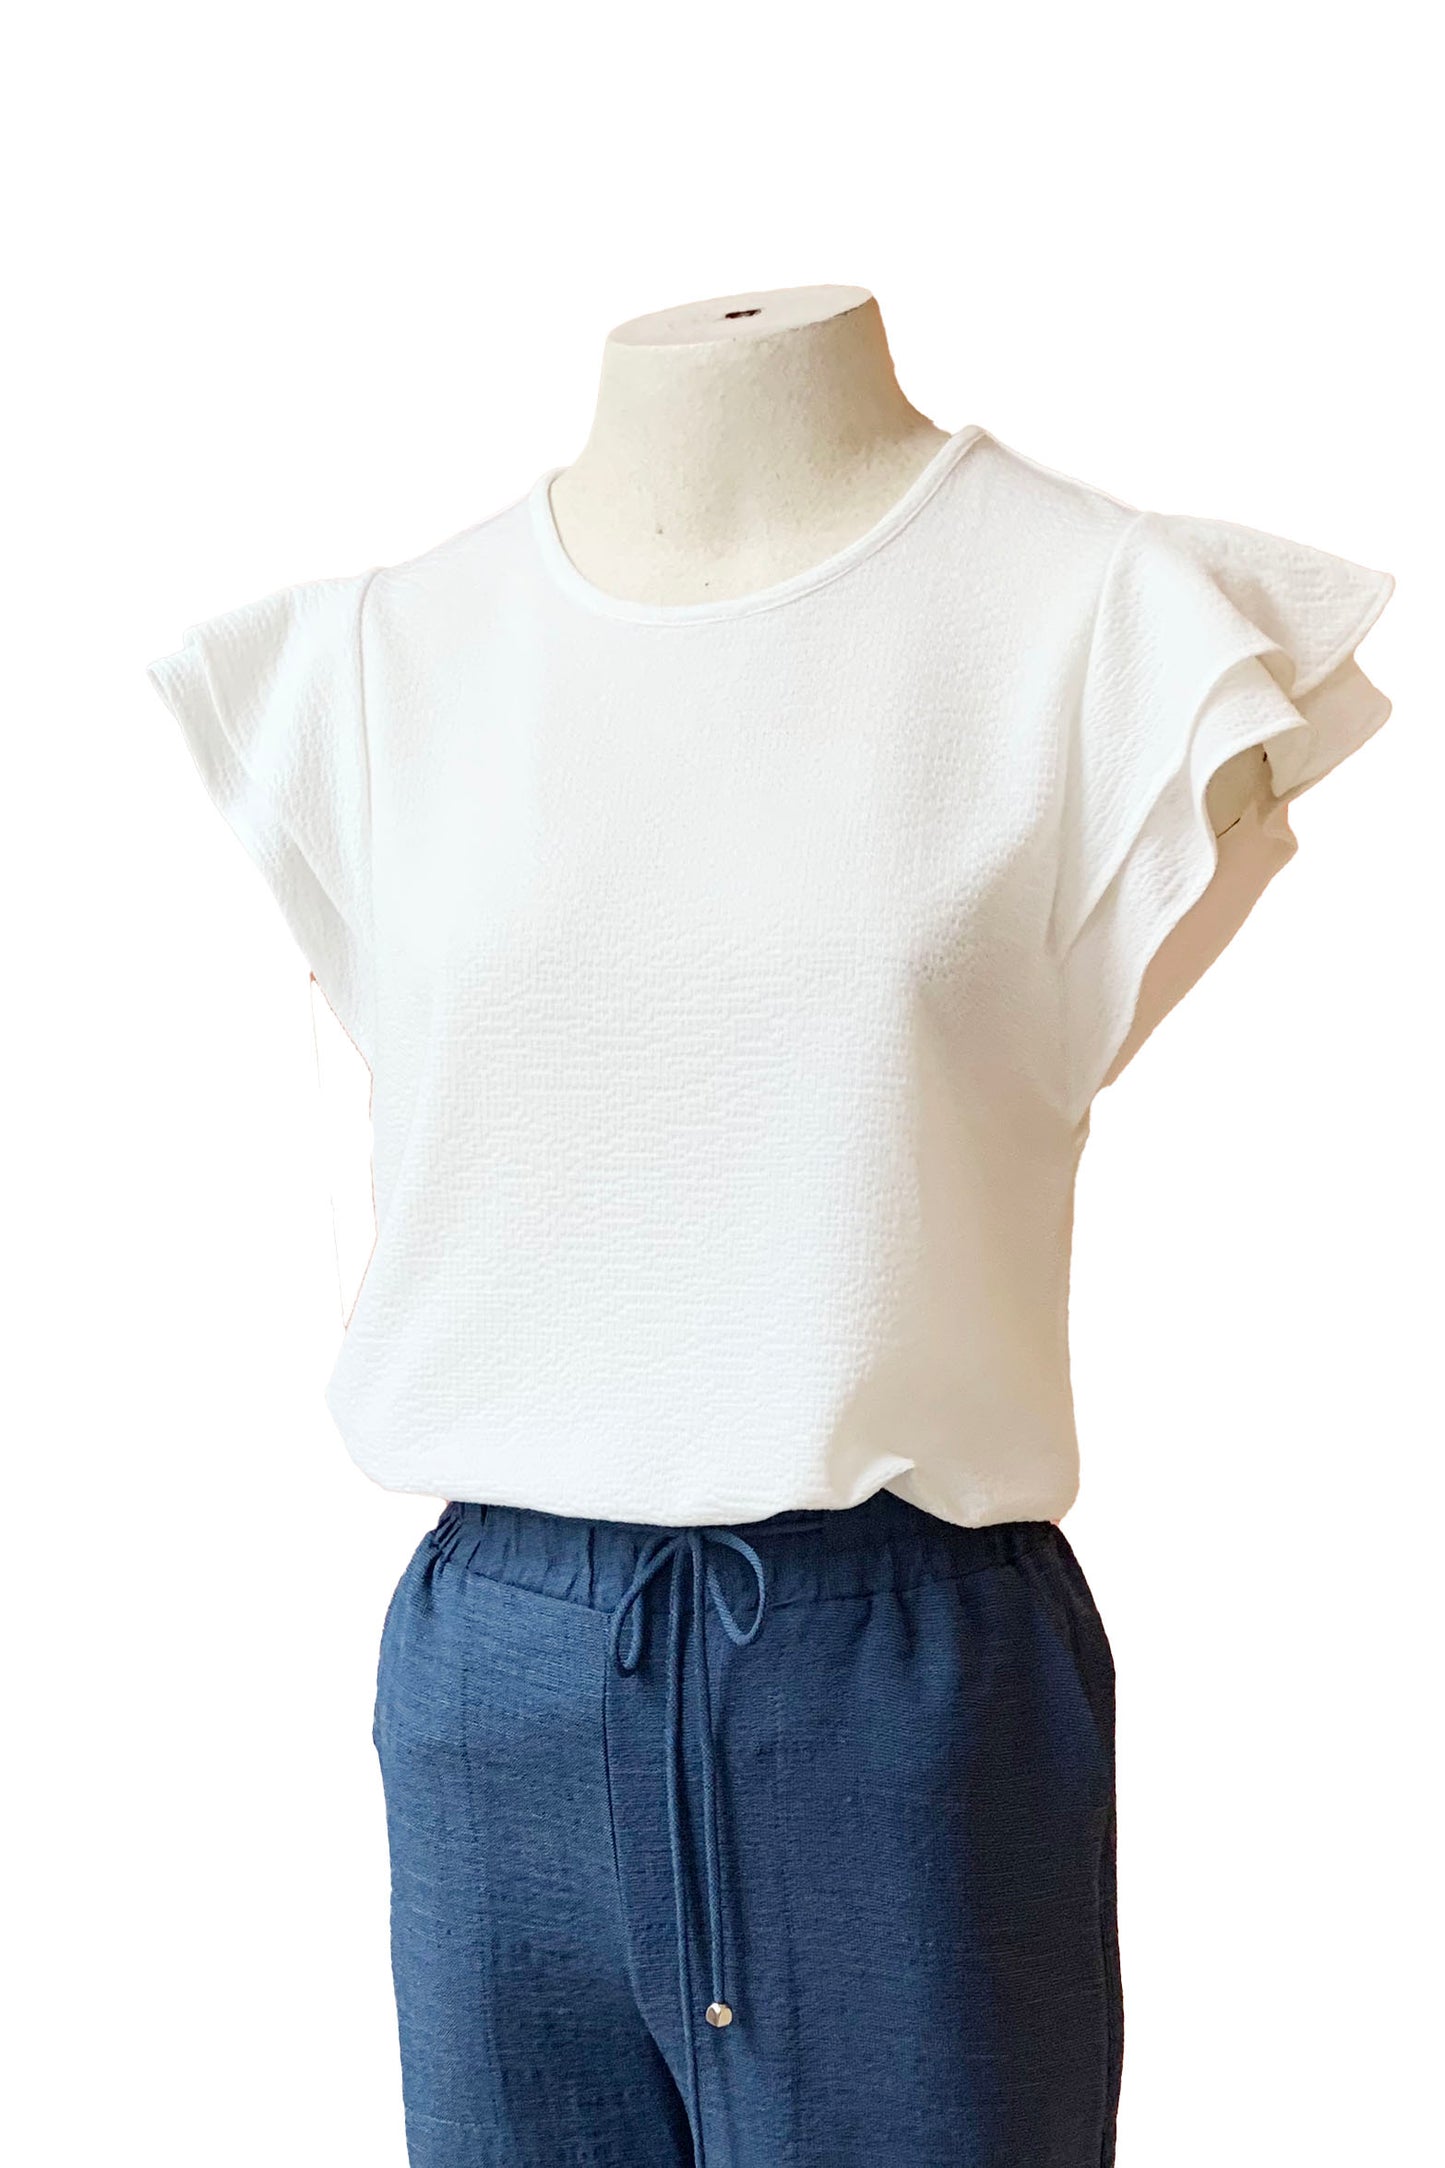 Casper Top by Pure Essence, Ivory, ruffles at shoulders, short sleeves, round neck, slightly fitted shape, sizes XS to XXL, made in Canada